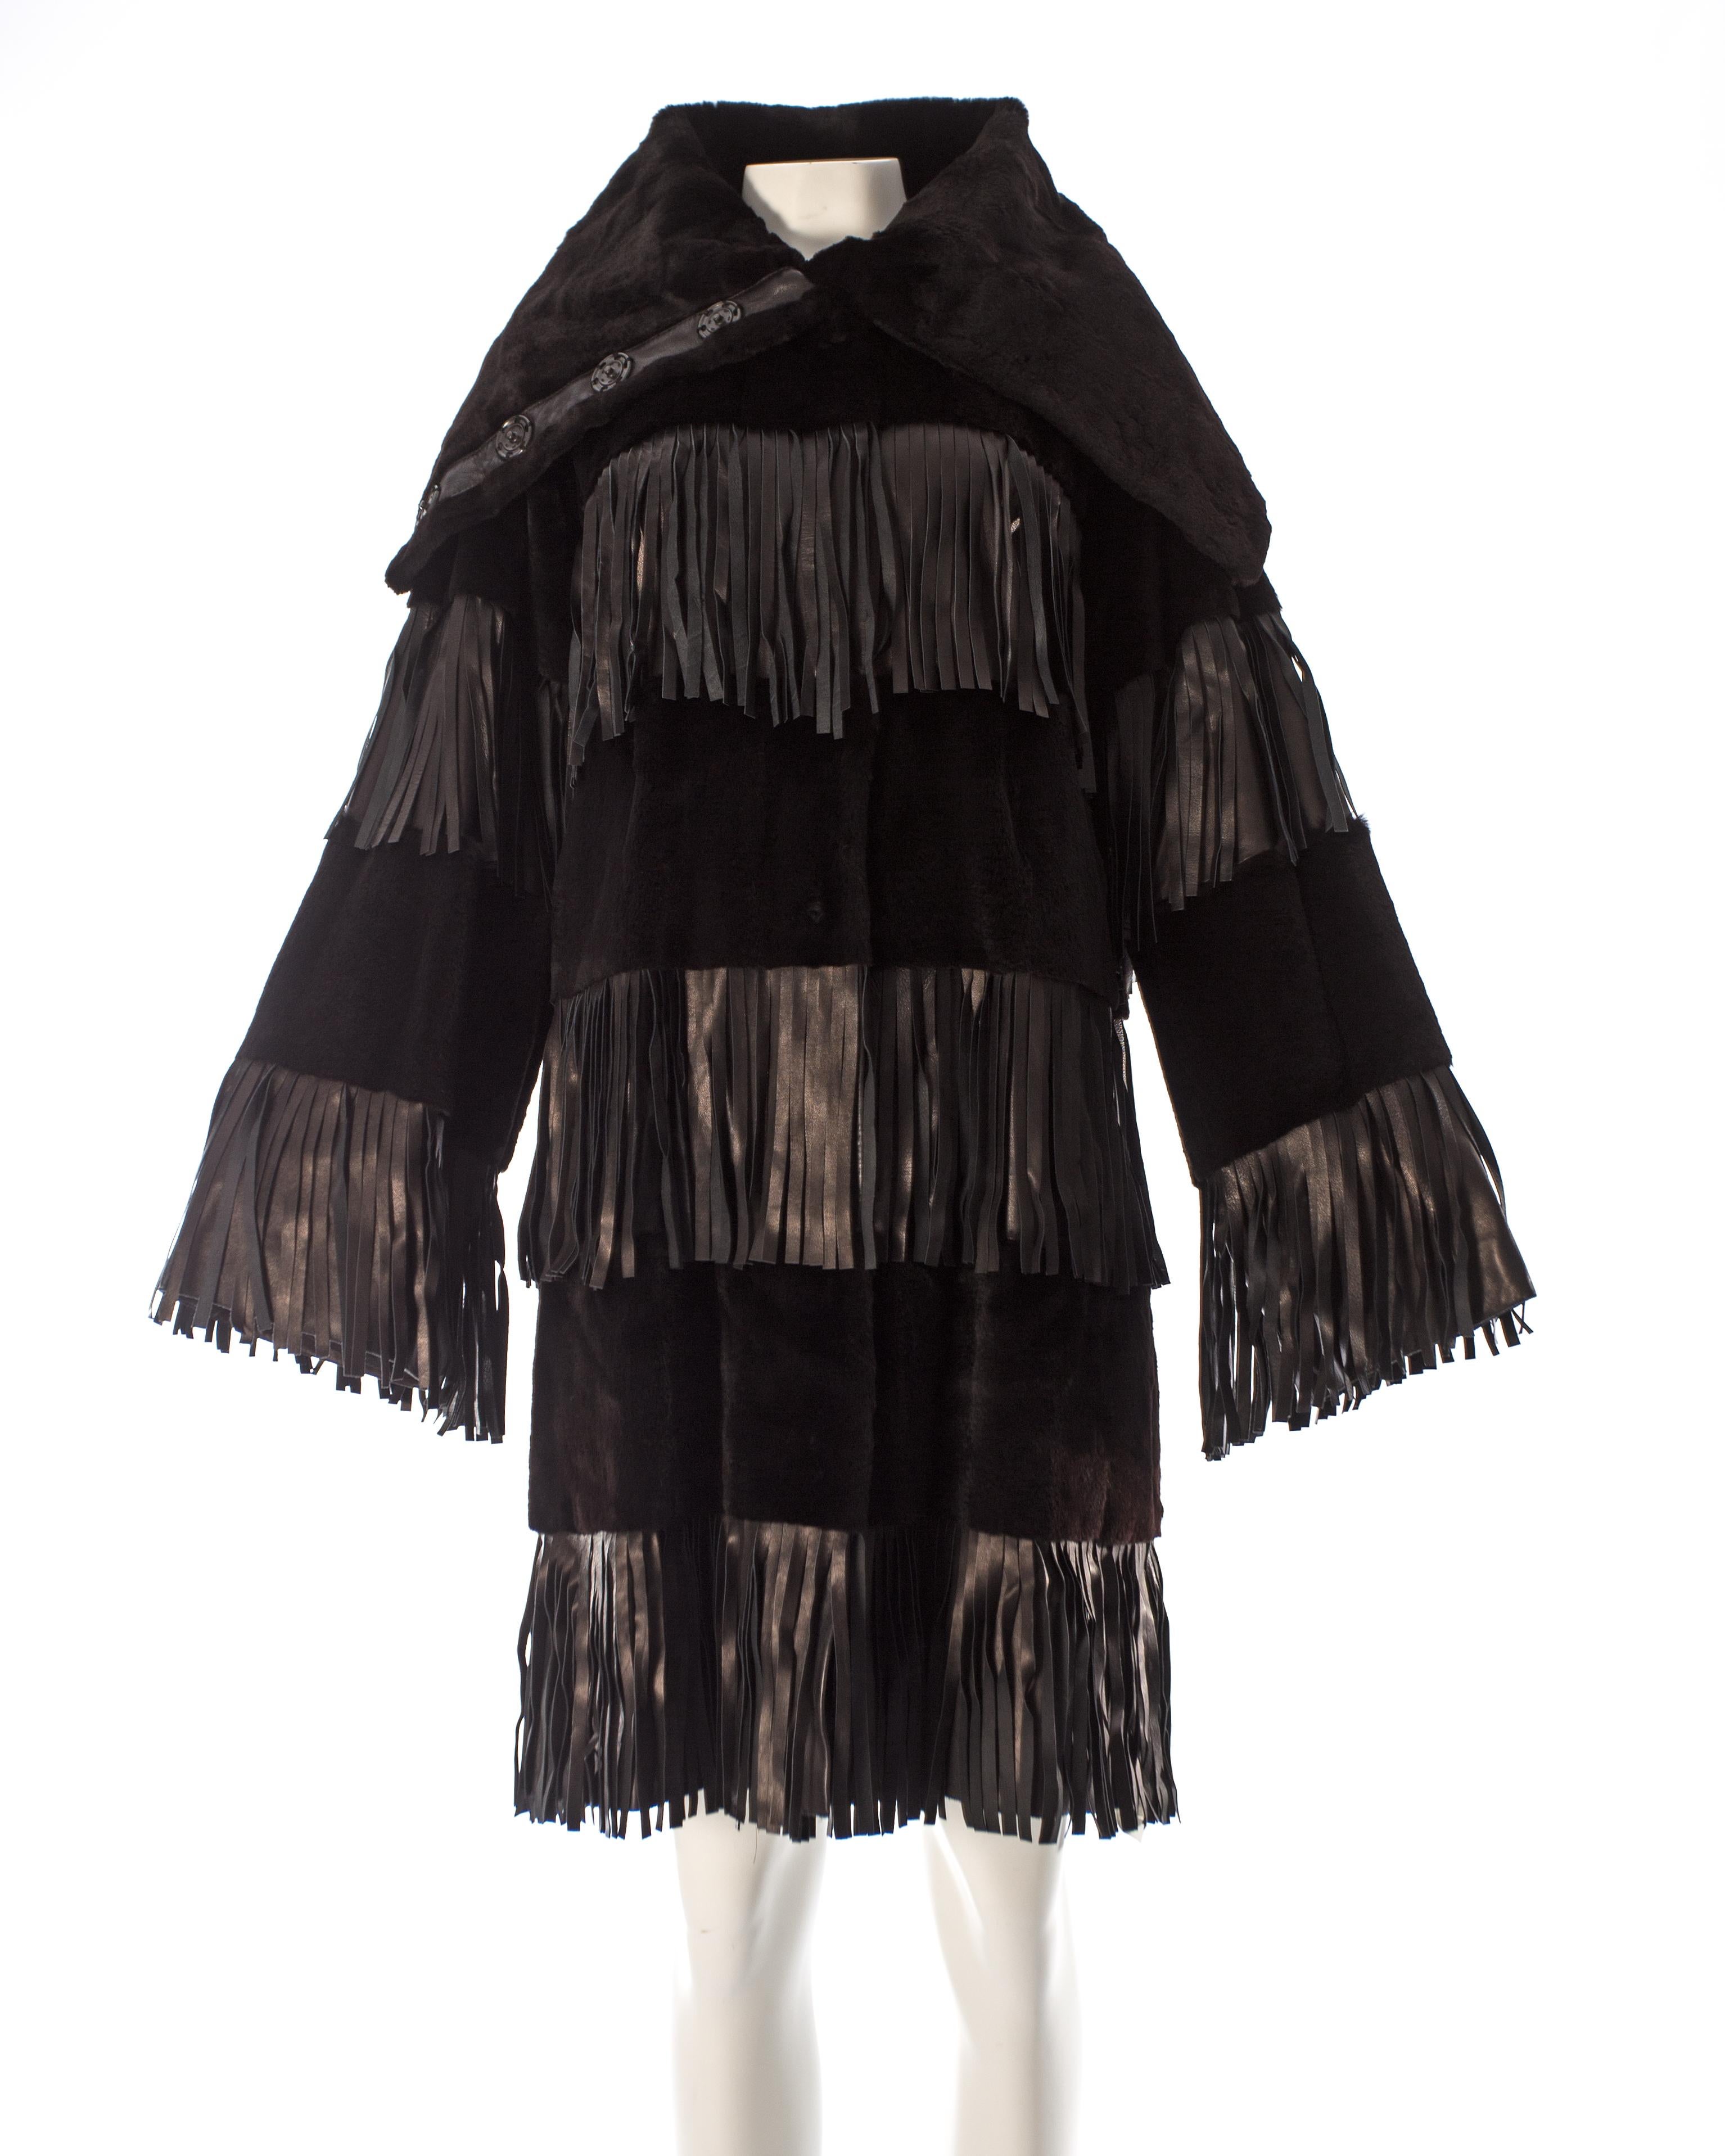 Black sheared weasel fur coat with leather fringe inserts. 

- Extra tall funnel collar 
- Large snap button closures throughout 
- Black silk lining

Autumn-Winter 2003 